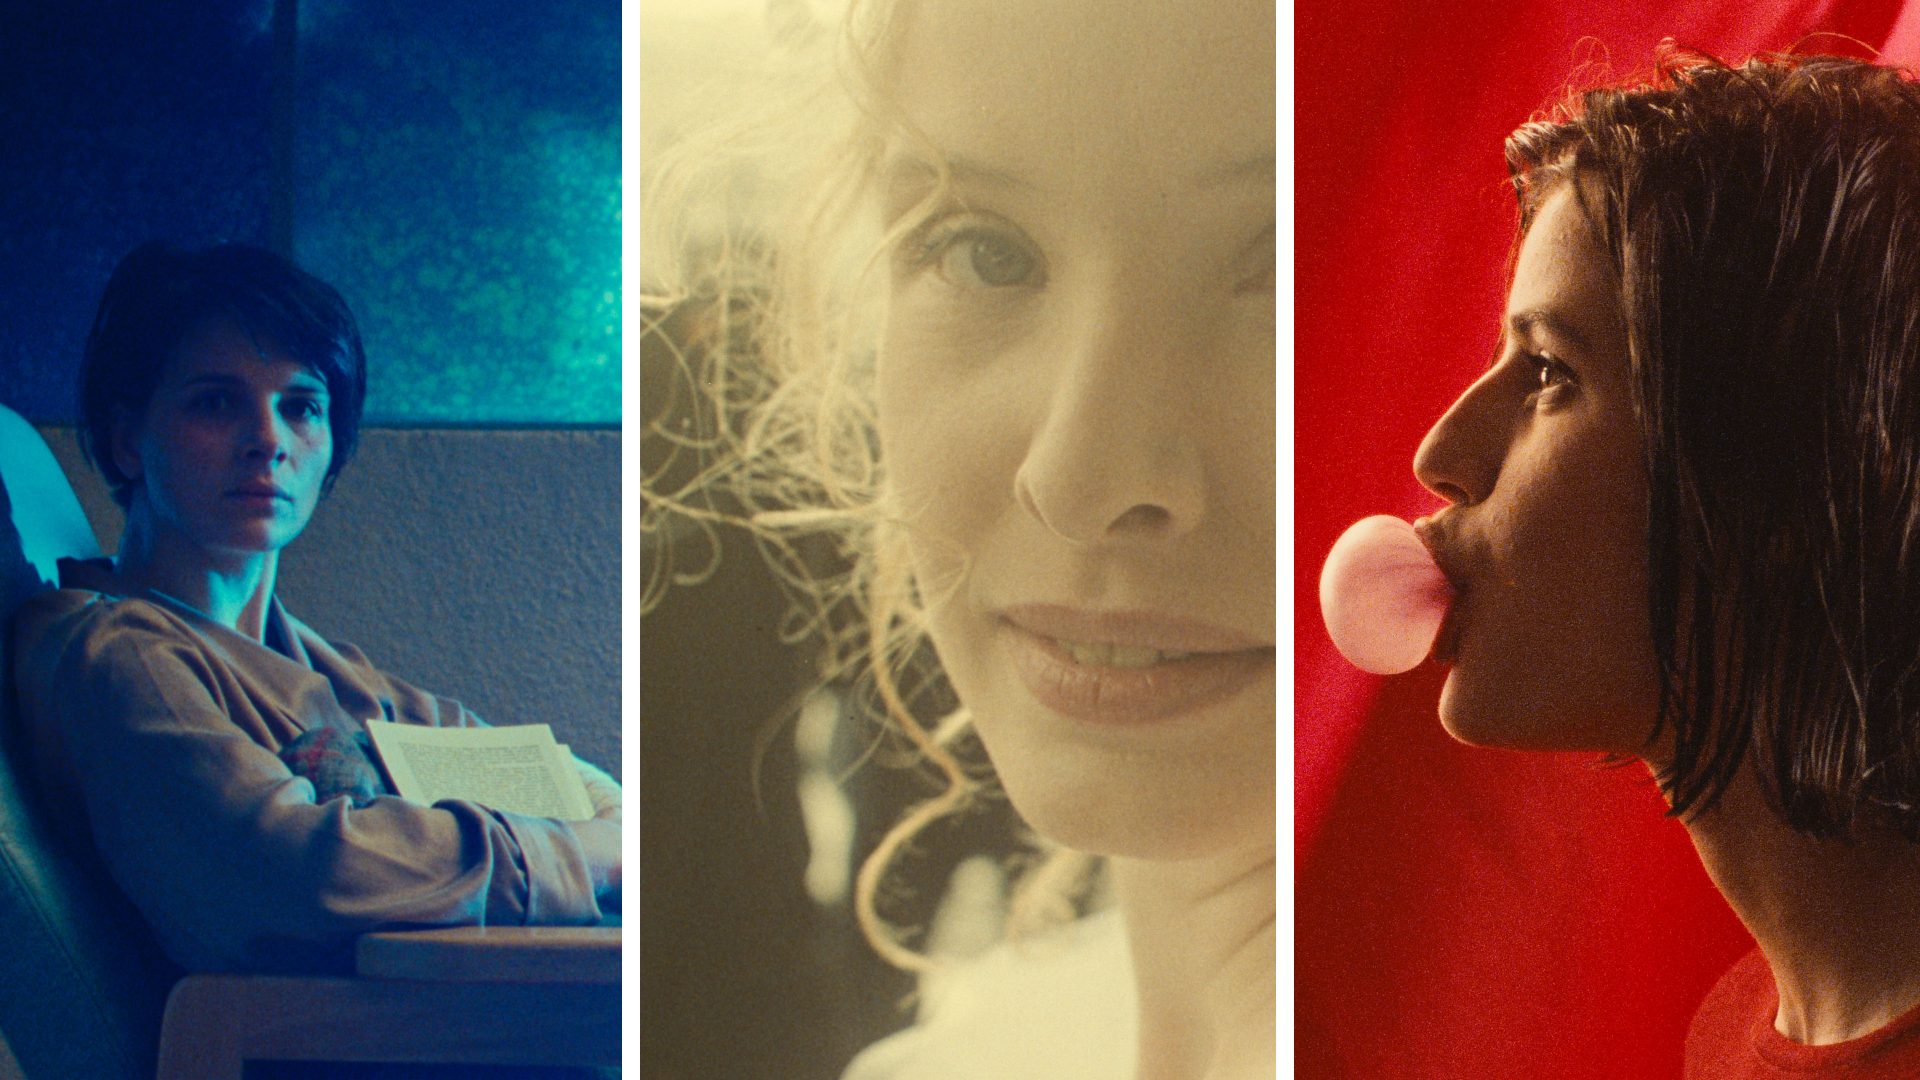 Juliette Binoche in Three Colours: Blue; Julie Delpy in Three Colours: White, and Irène Jacob in Three Colours: Red. Photos: Curzon